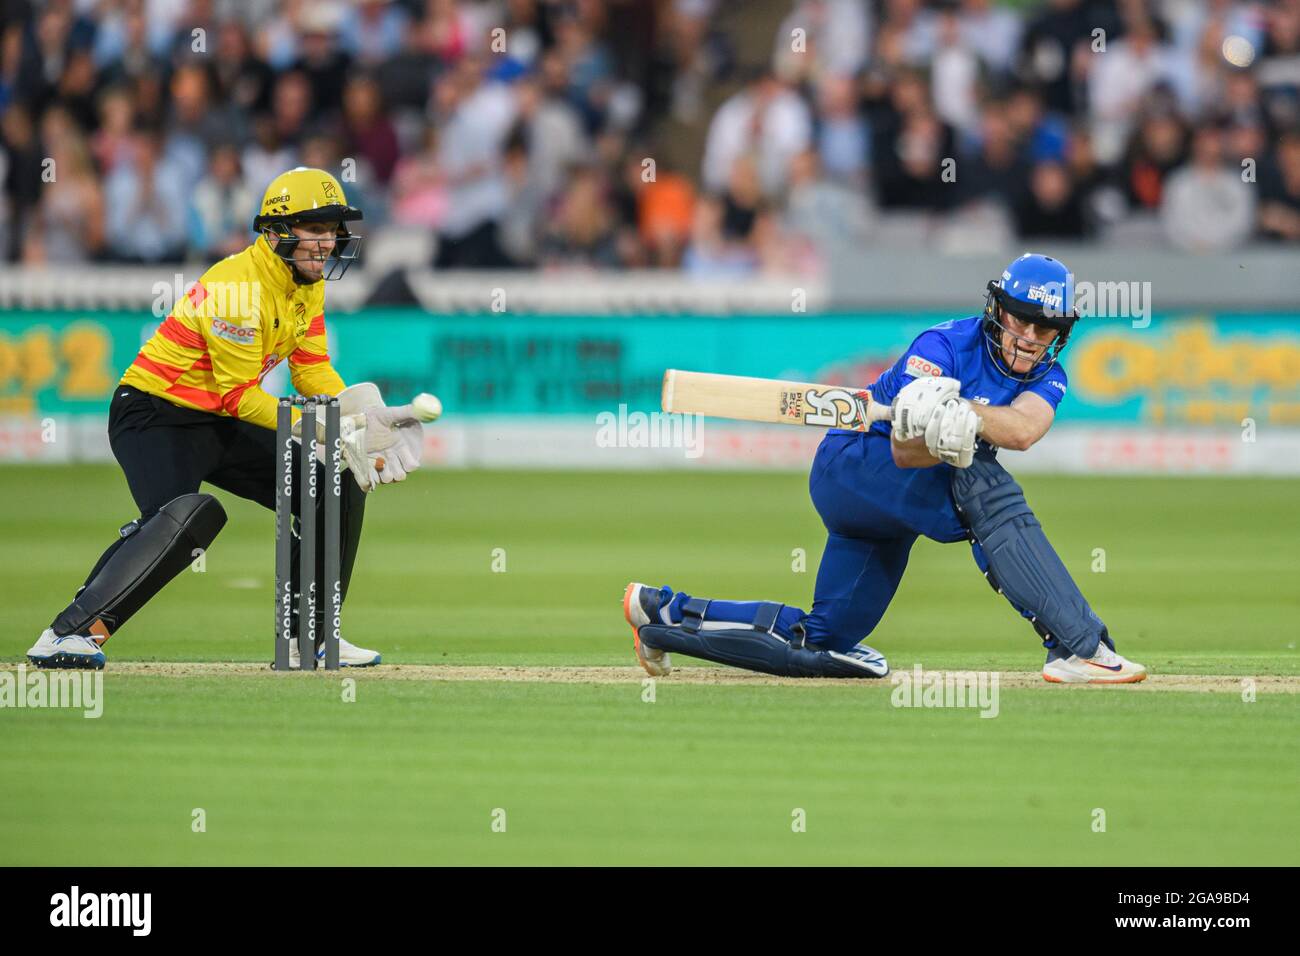 LONDON, UNITED KINGDOM. 29th Jul, 2021. Doin Morgan of London Spirit (Capt.) (left) and Tom Moores of Trent Rockets (right) during The Hundred between London Spirit vs Trent Rockets at Lord's on Thursday, July 29, 2021 in LONDON ENGLAND.  Credit: Taka G Wu/Alamy Live News Stock Photo